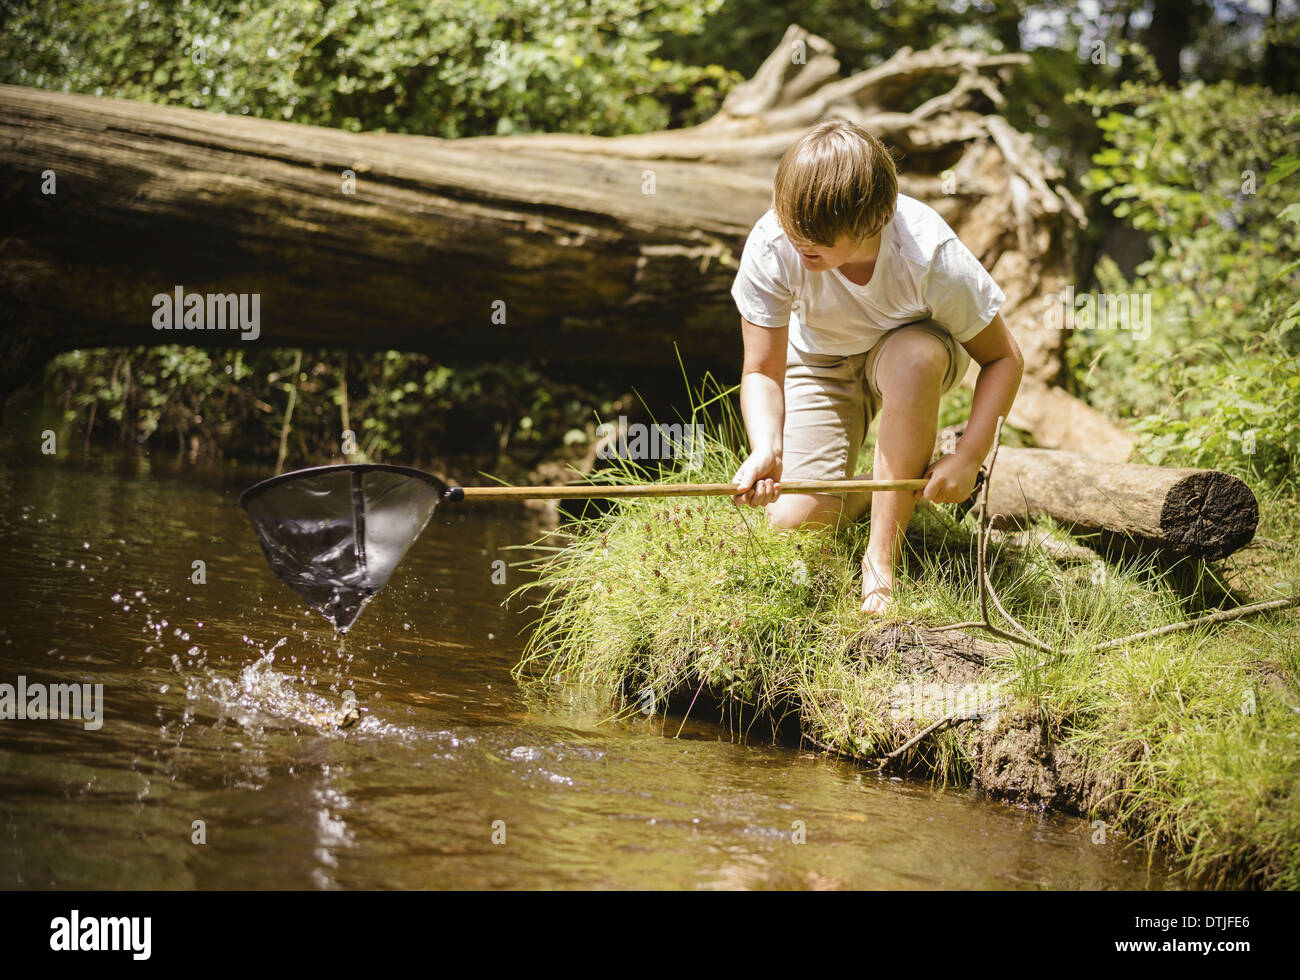 A boy kneeling by the river bank leaning over and using a small fishing net  Hampshire England Stock Photo